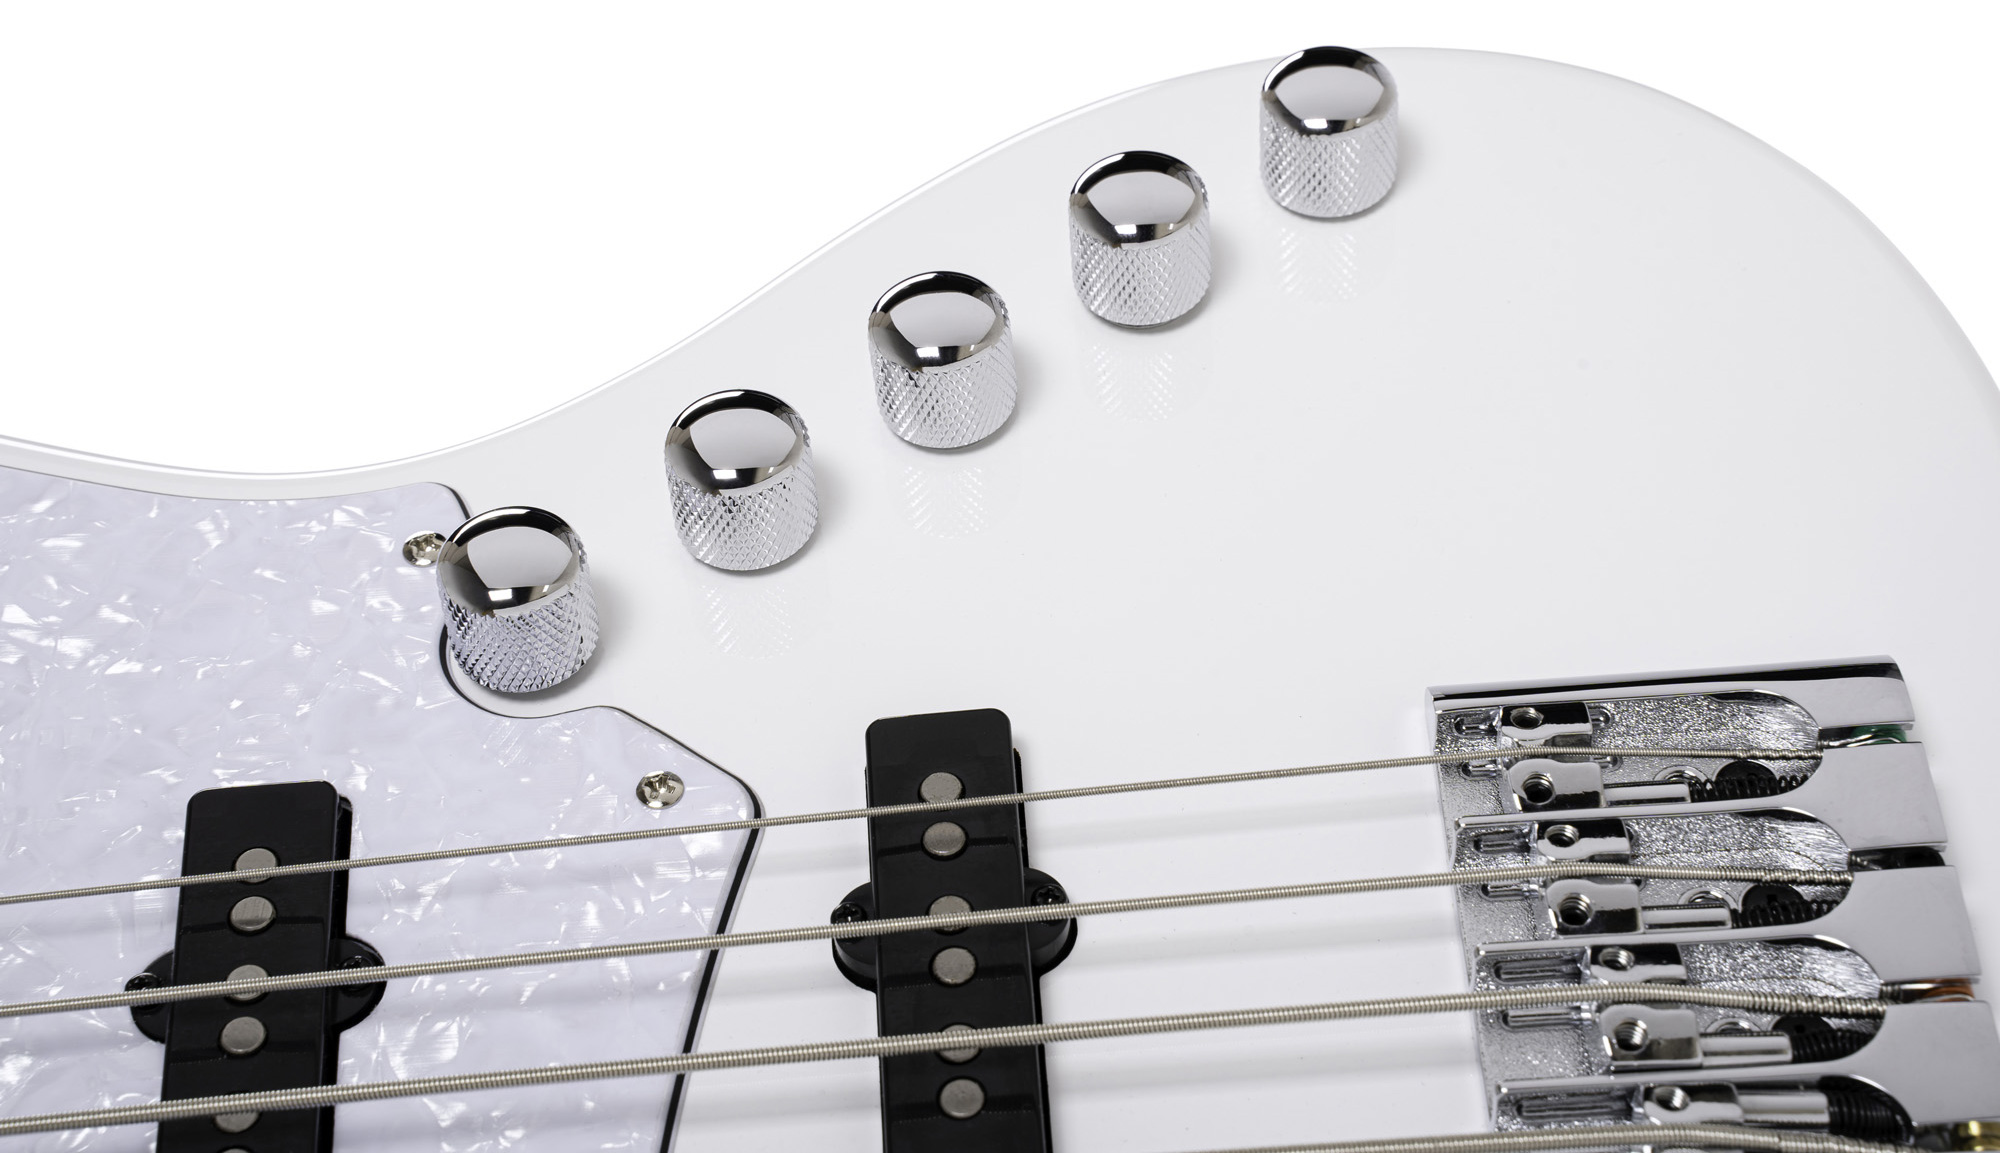 Cort Elrick Njs 5c Active Bartolini Mn - White - Solid body electric bass - Variation 5